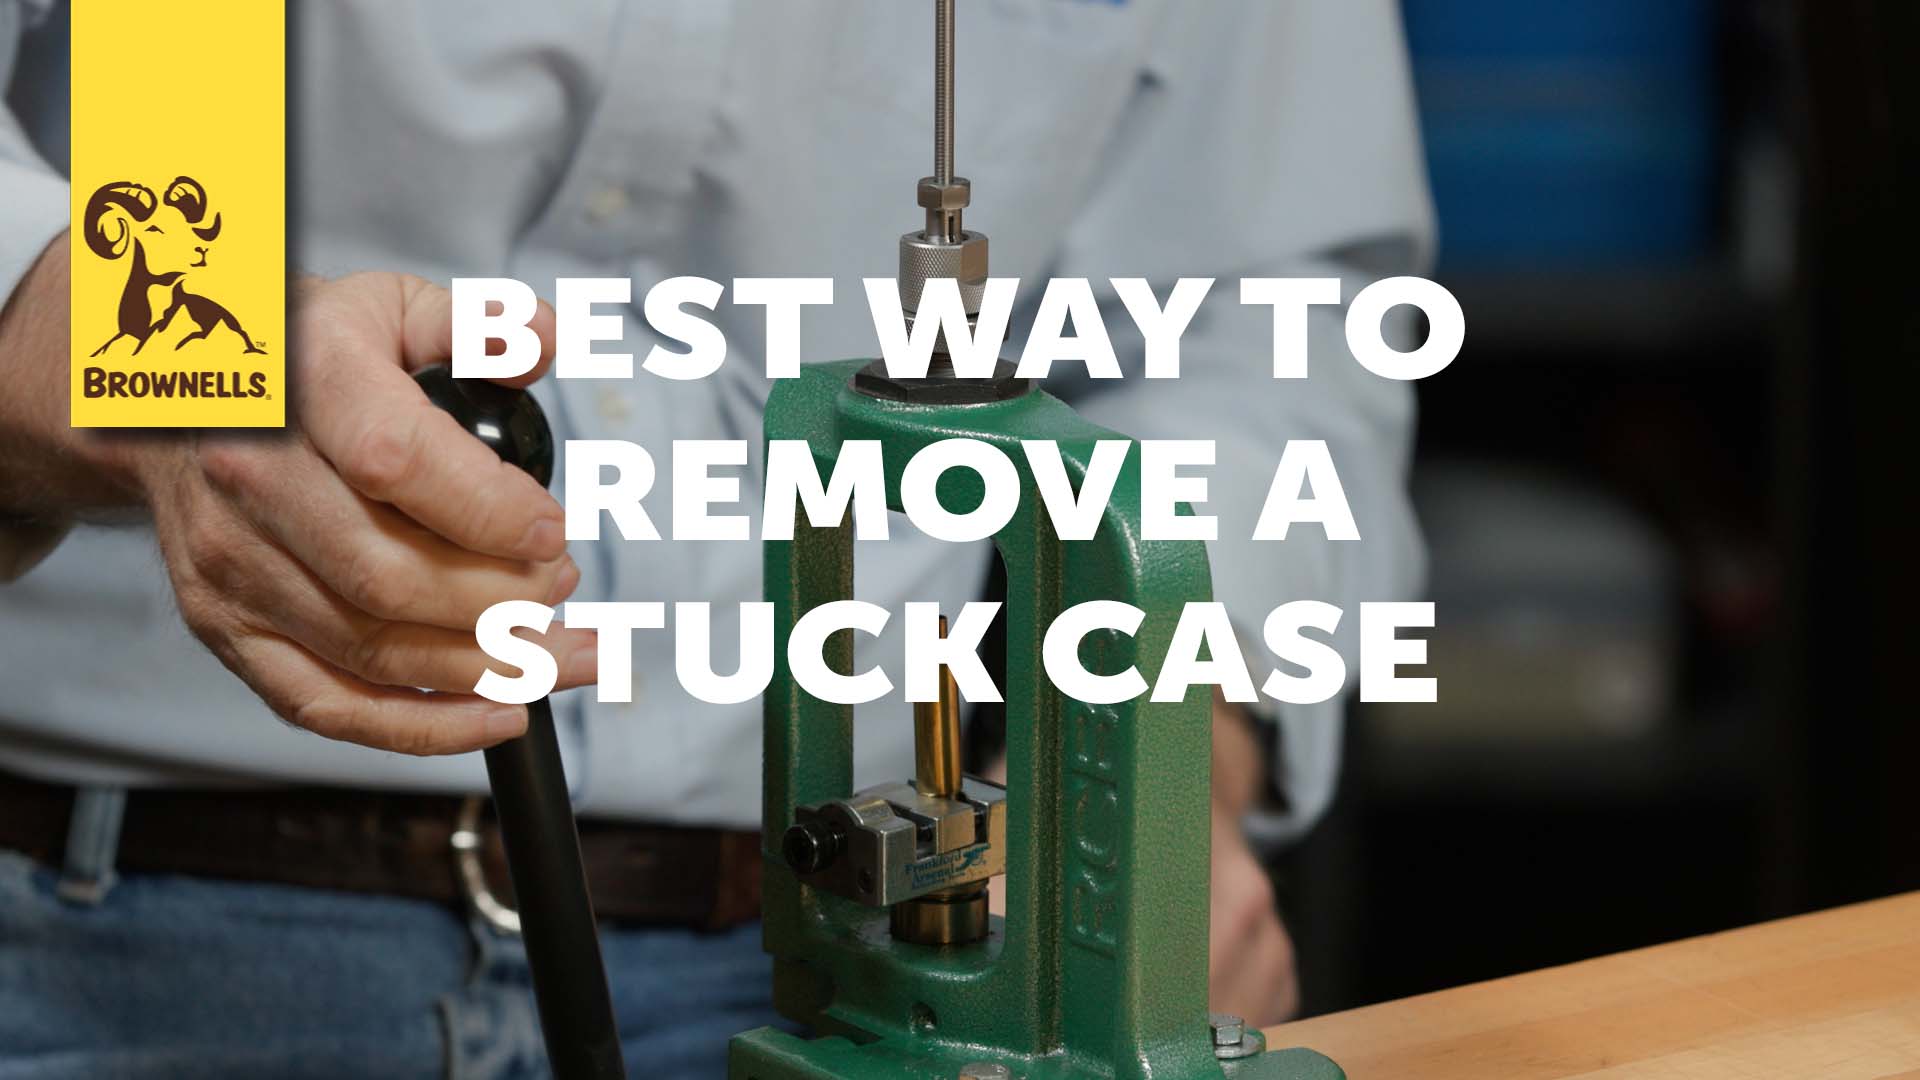 Quick Tip: The Best Way to Remove a Stuck Case